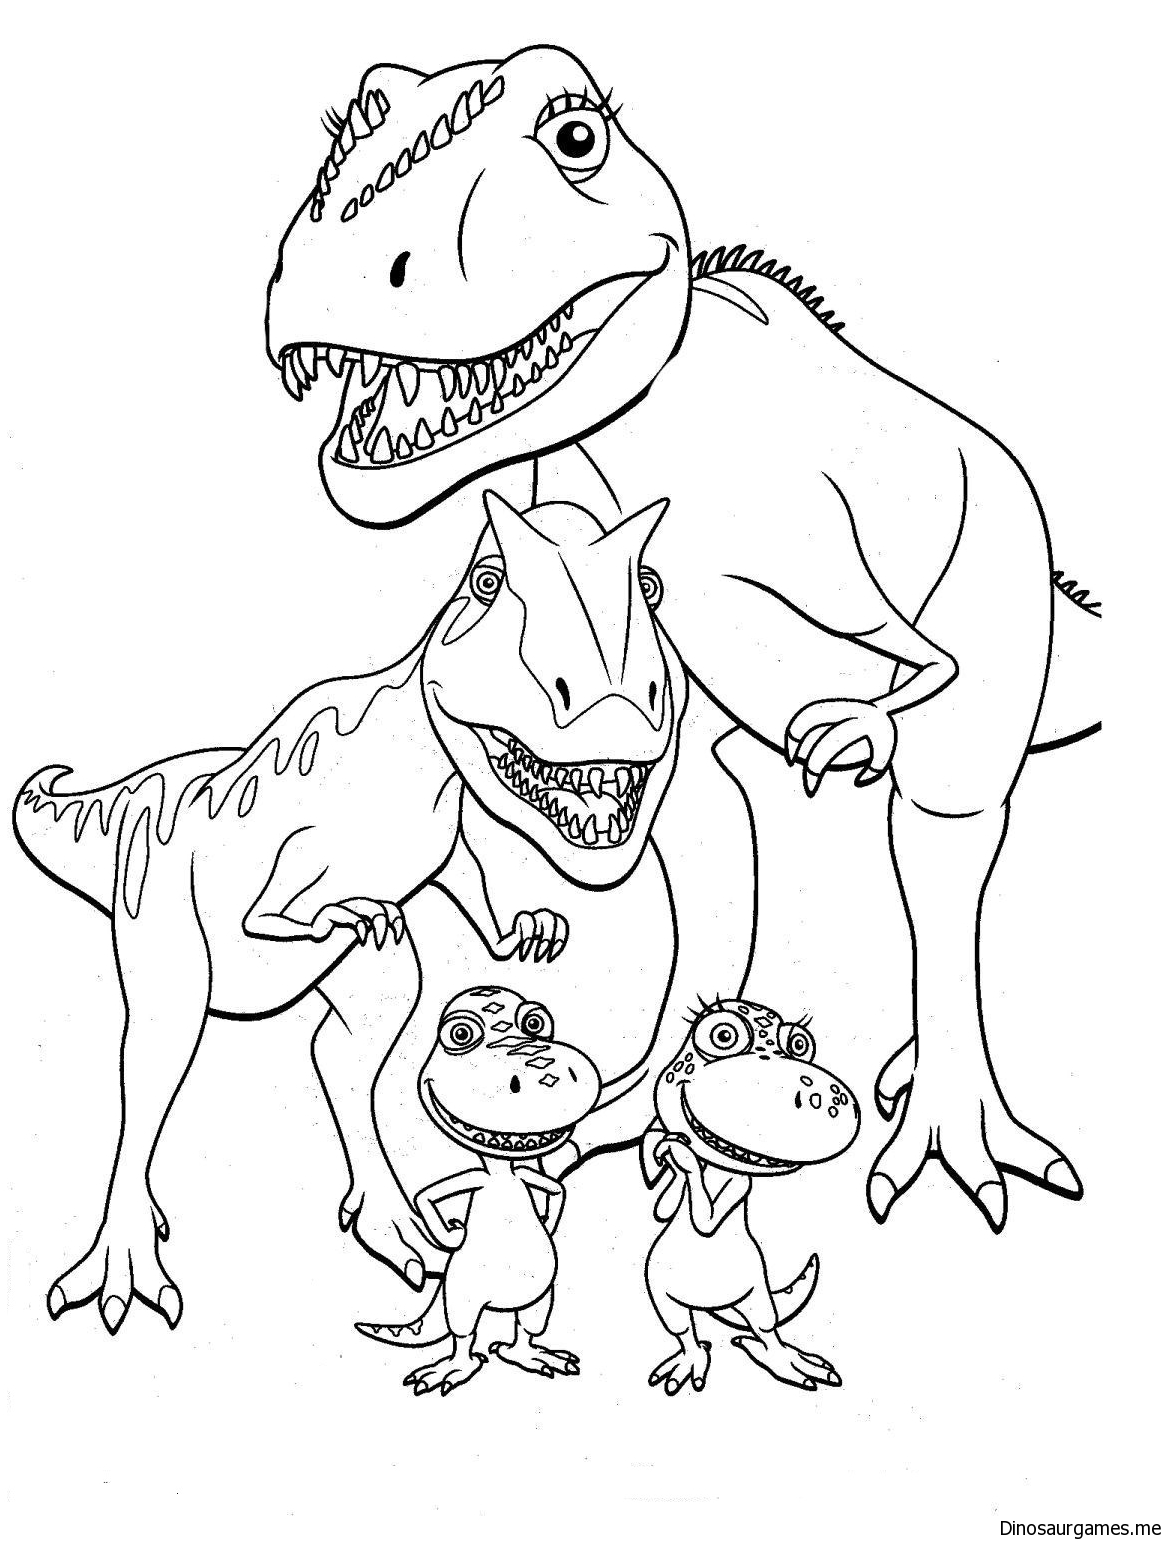 Dinosaur Train 5 Coloring Page - Dinosaur Coloring Pages